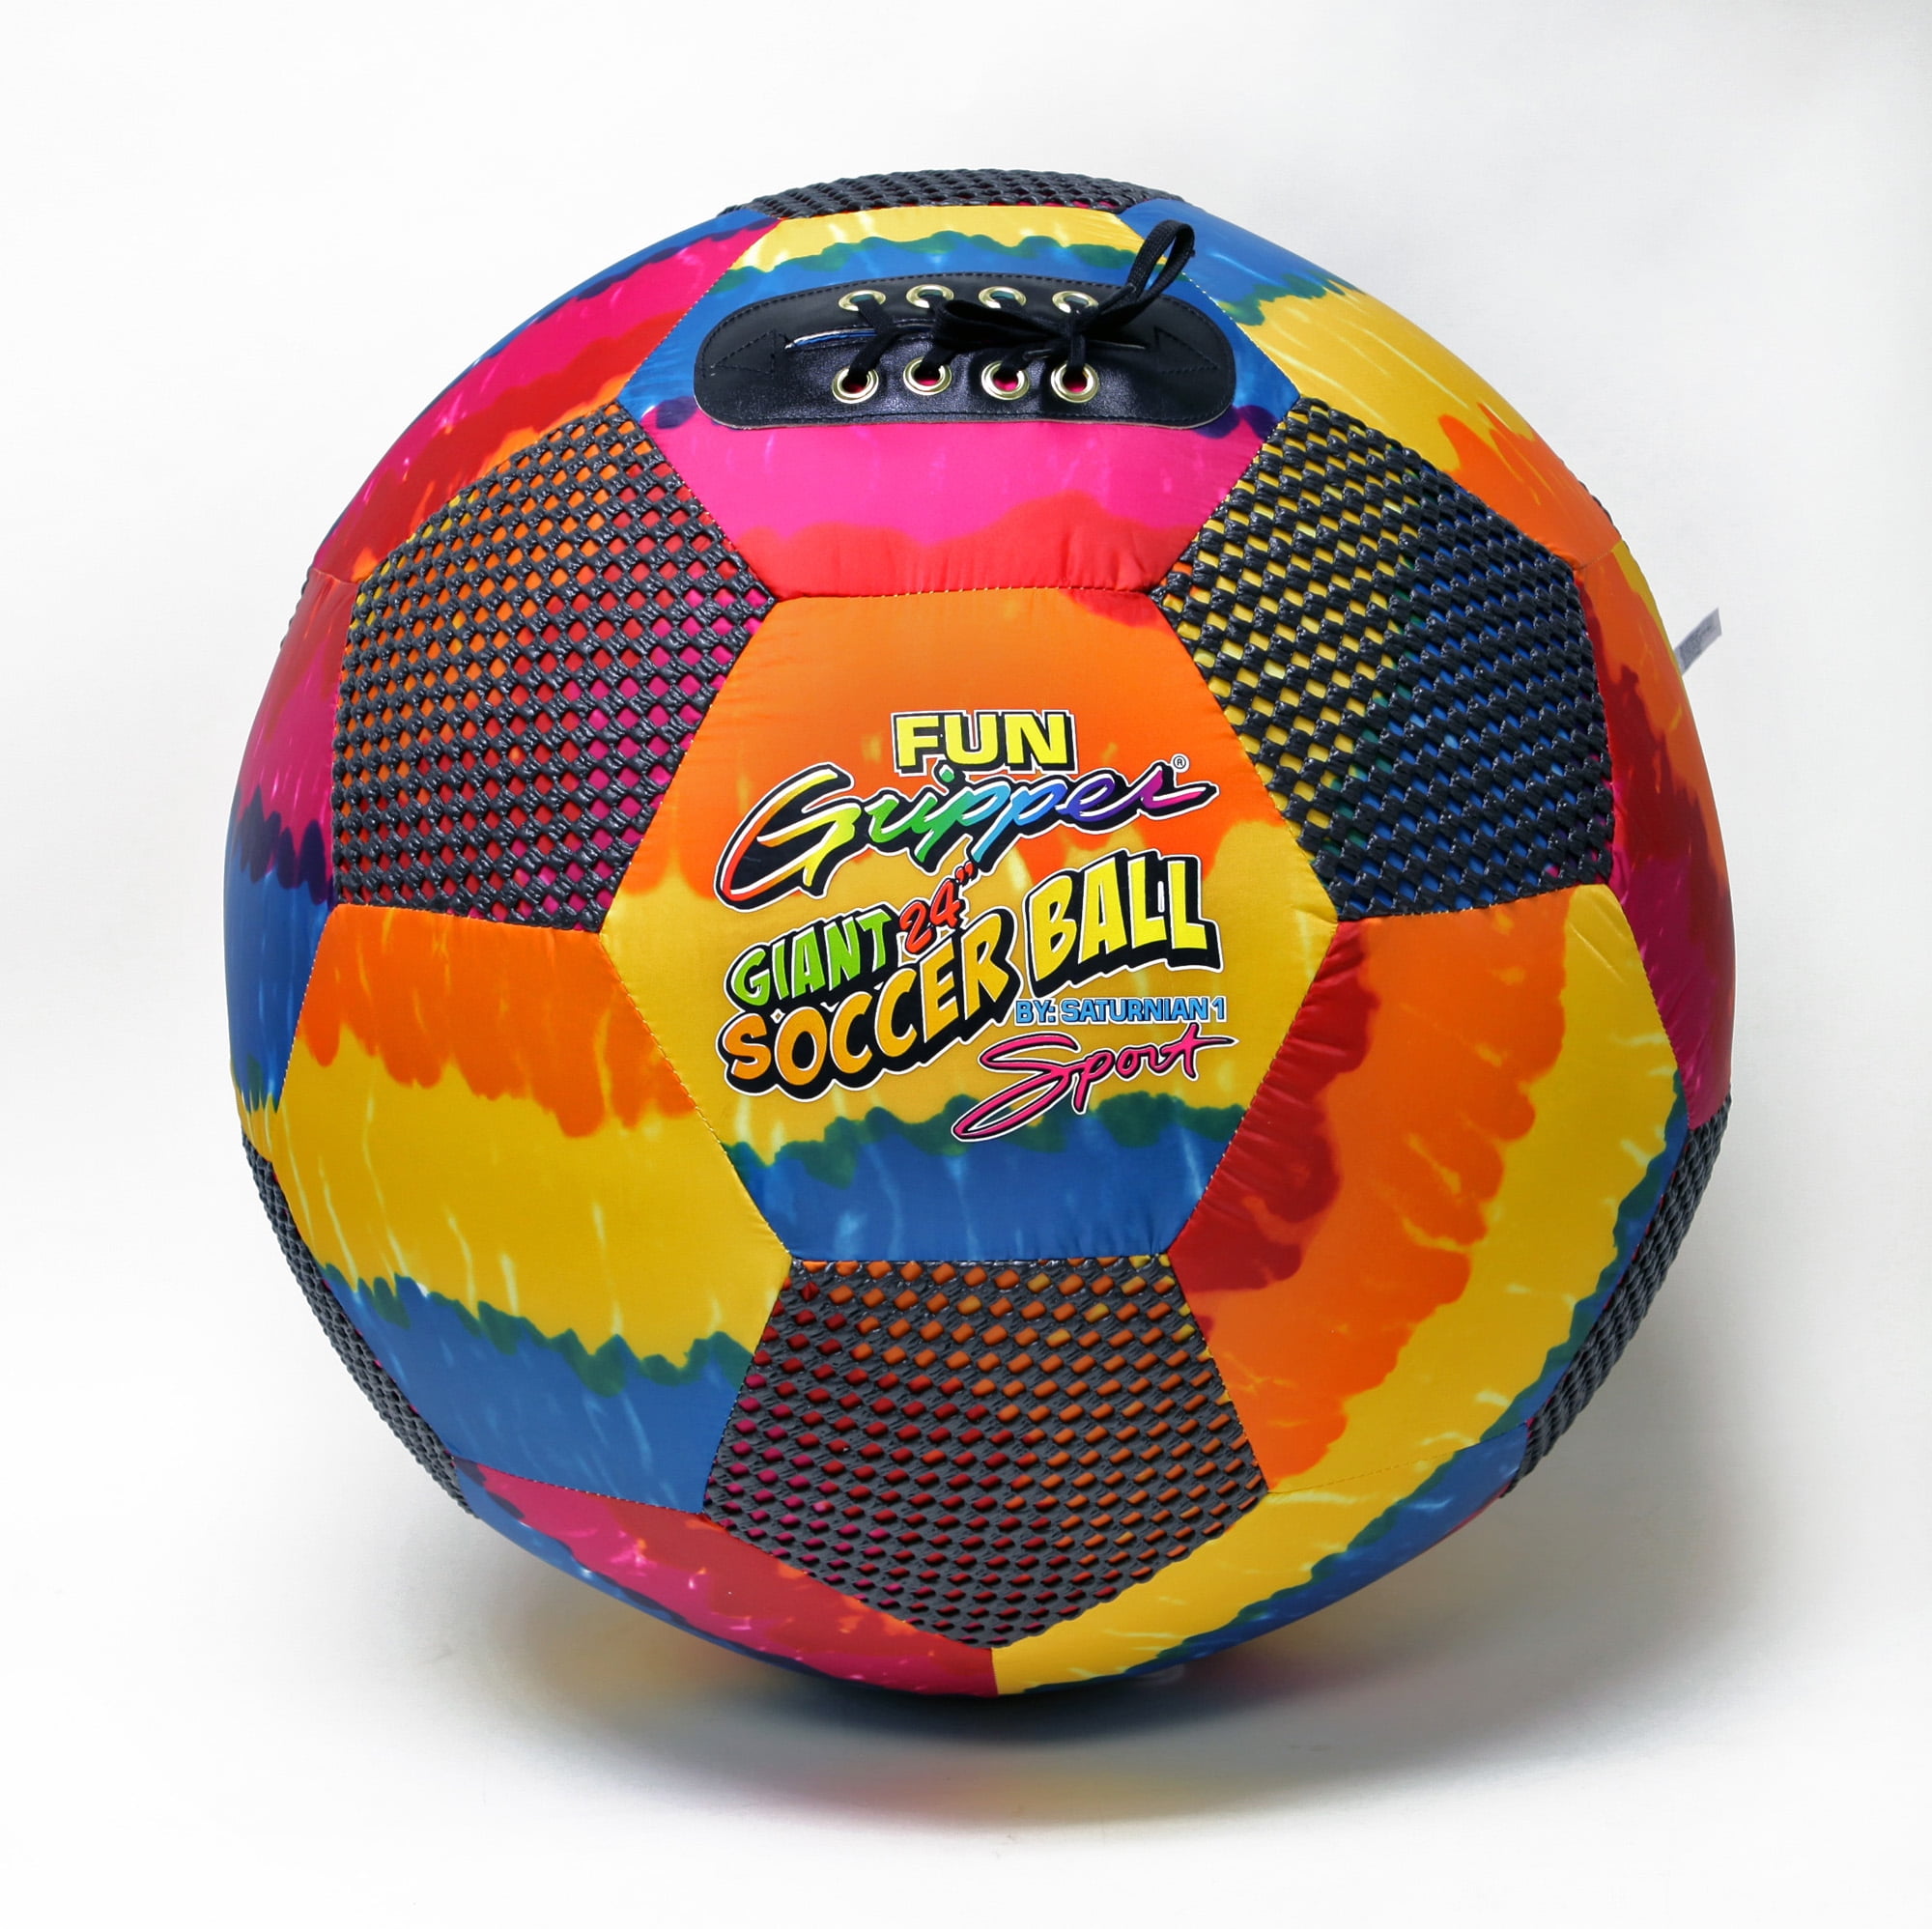 Perfect for Indoor TD Tie Dye Soccerball 10.0 O/S by: Saturnian I P.E Supplier fun gripper 